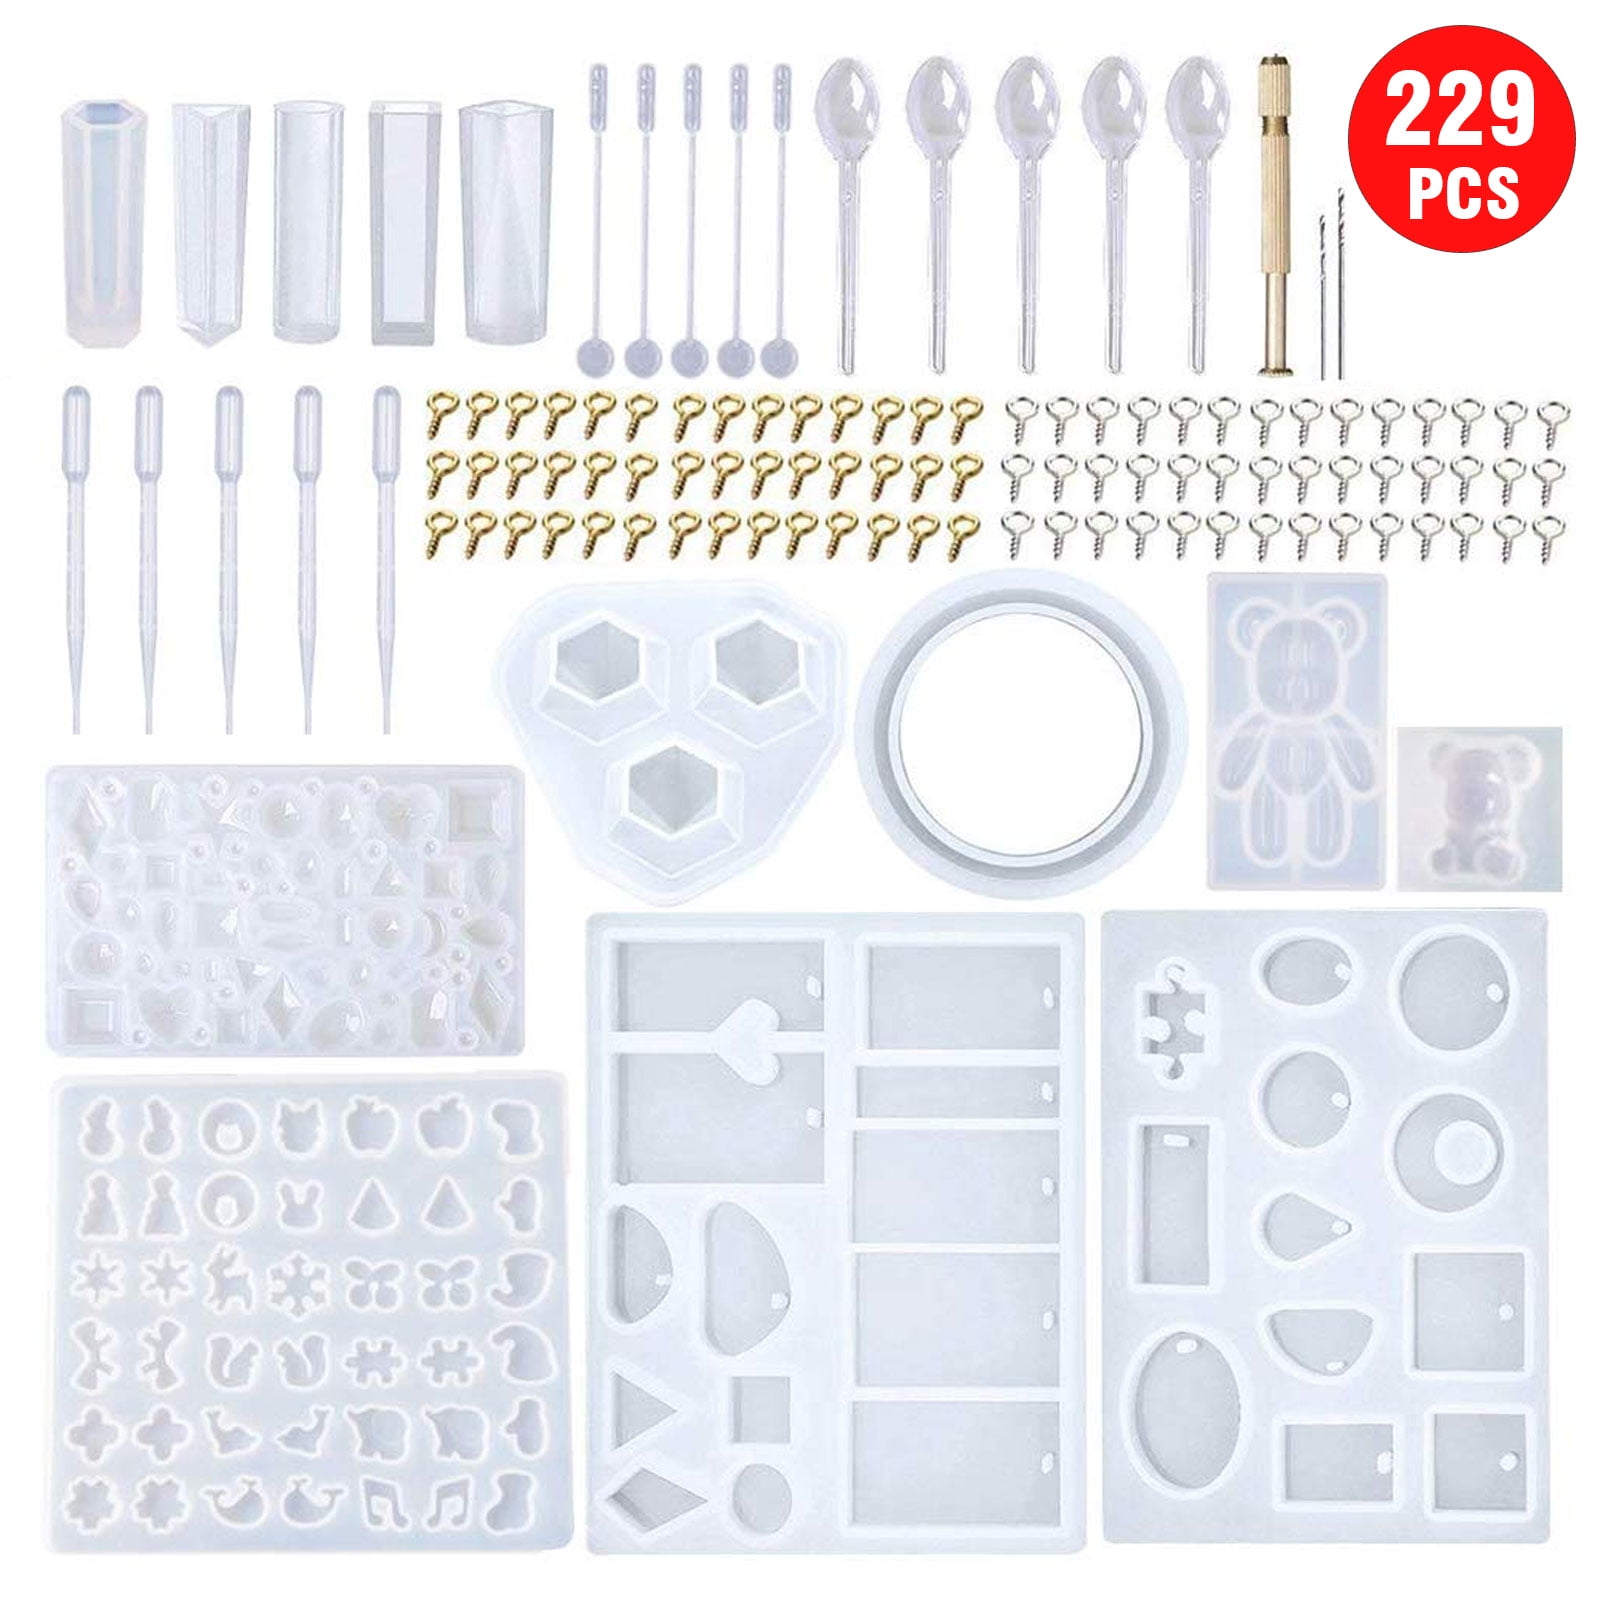 110 Epoxy Resin Casting Molds Kit Silicone Jewelry Pendant Craft Making Mold DIY 